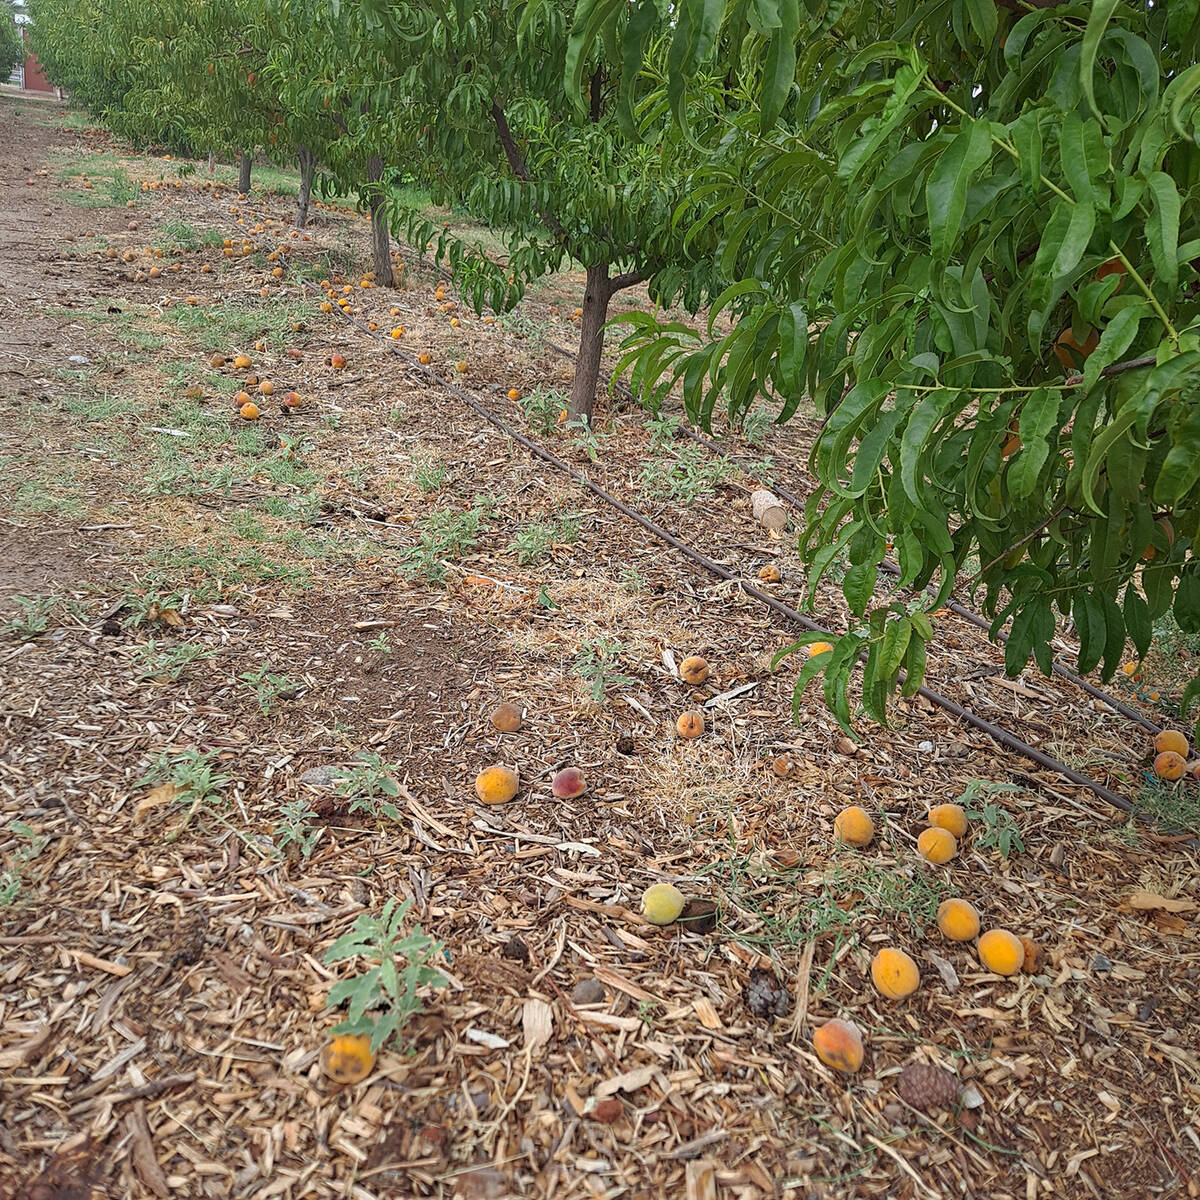 (Photo courtesy Bob Morris) Recommendations about what type of fruit tree to plant in the area ...